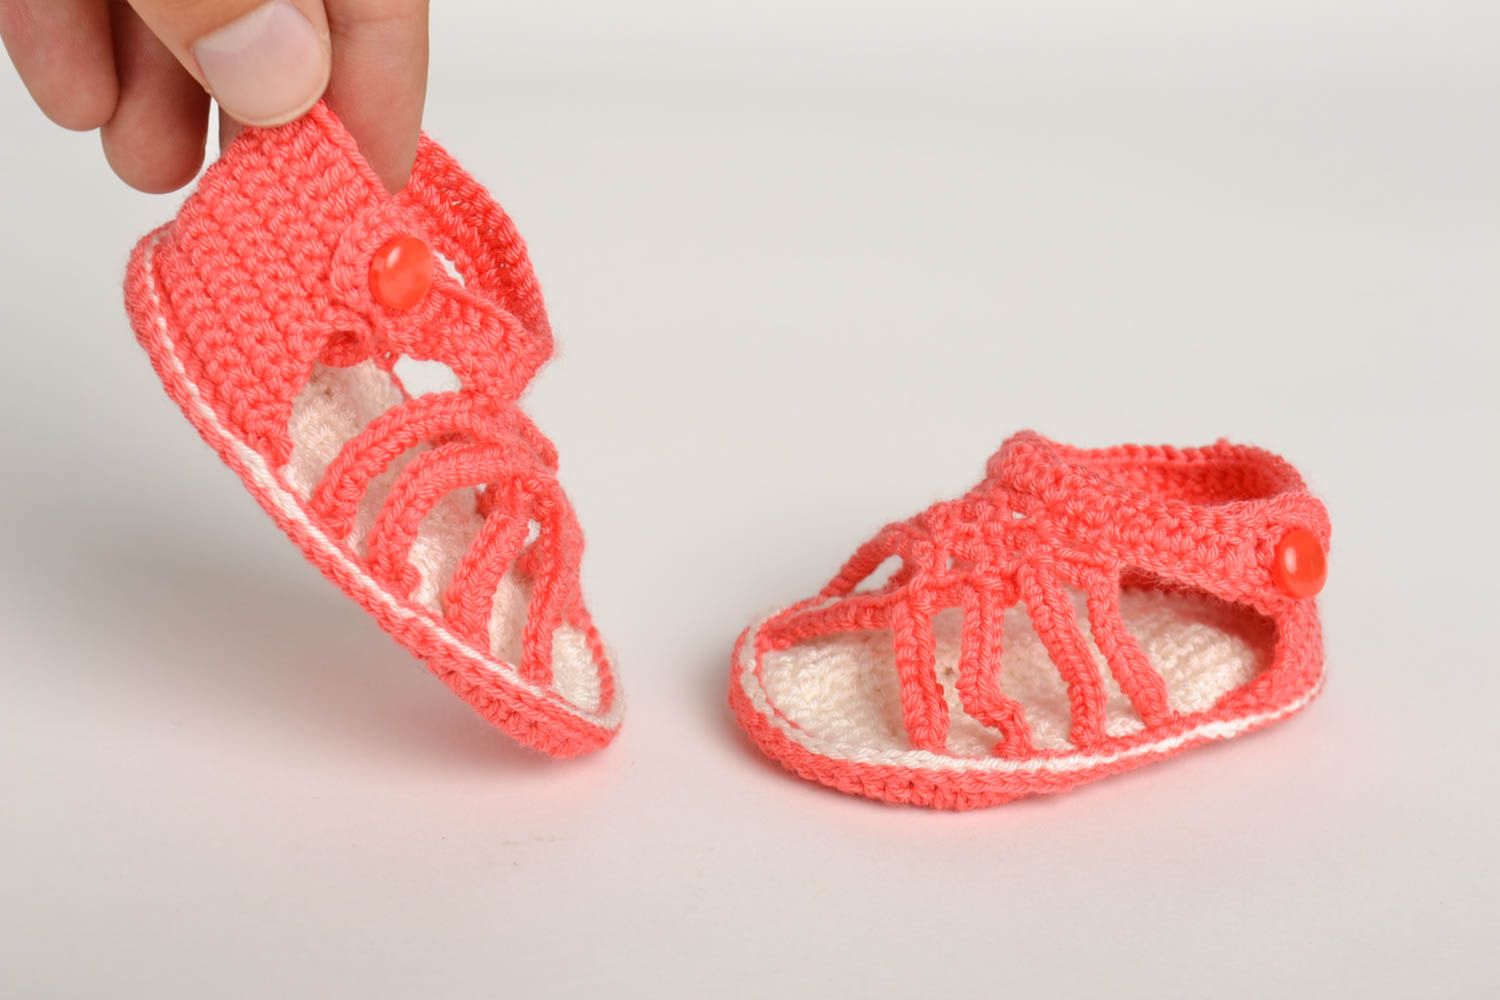 Handmade crocheted baby bootees unusual cute warn sandals lovely kids shoes photo 5